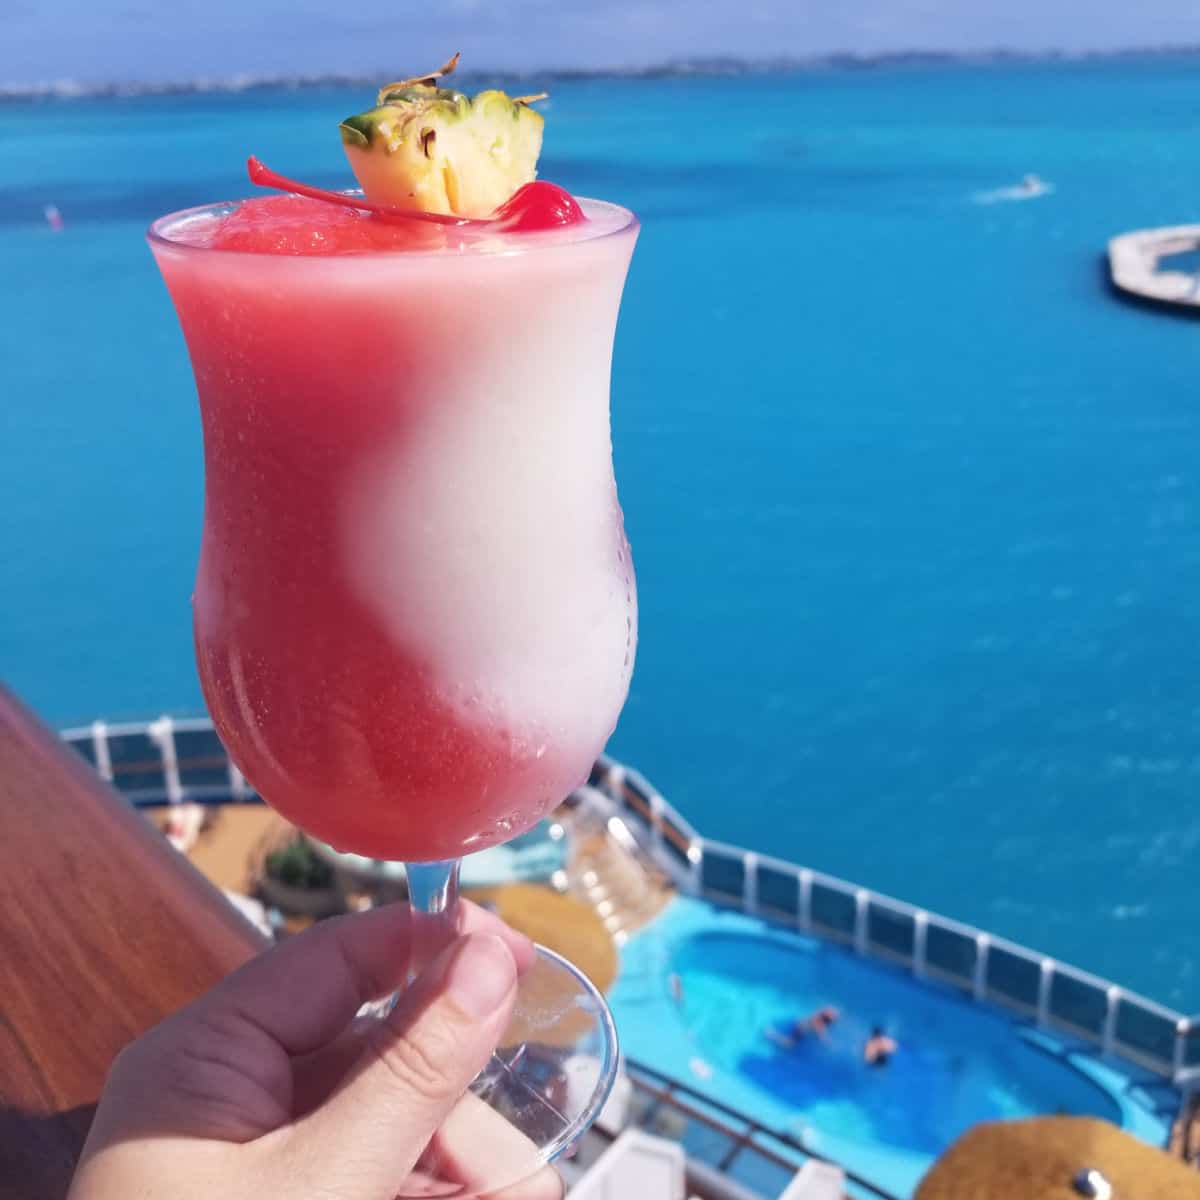 Miami Vice Cocktail in a hurricane glass with pineapple and cherry garnish with the tropical ocean in the background